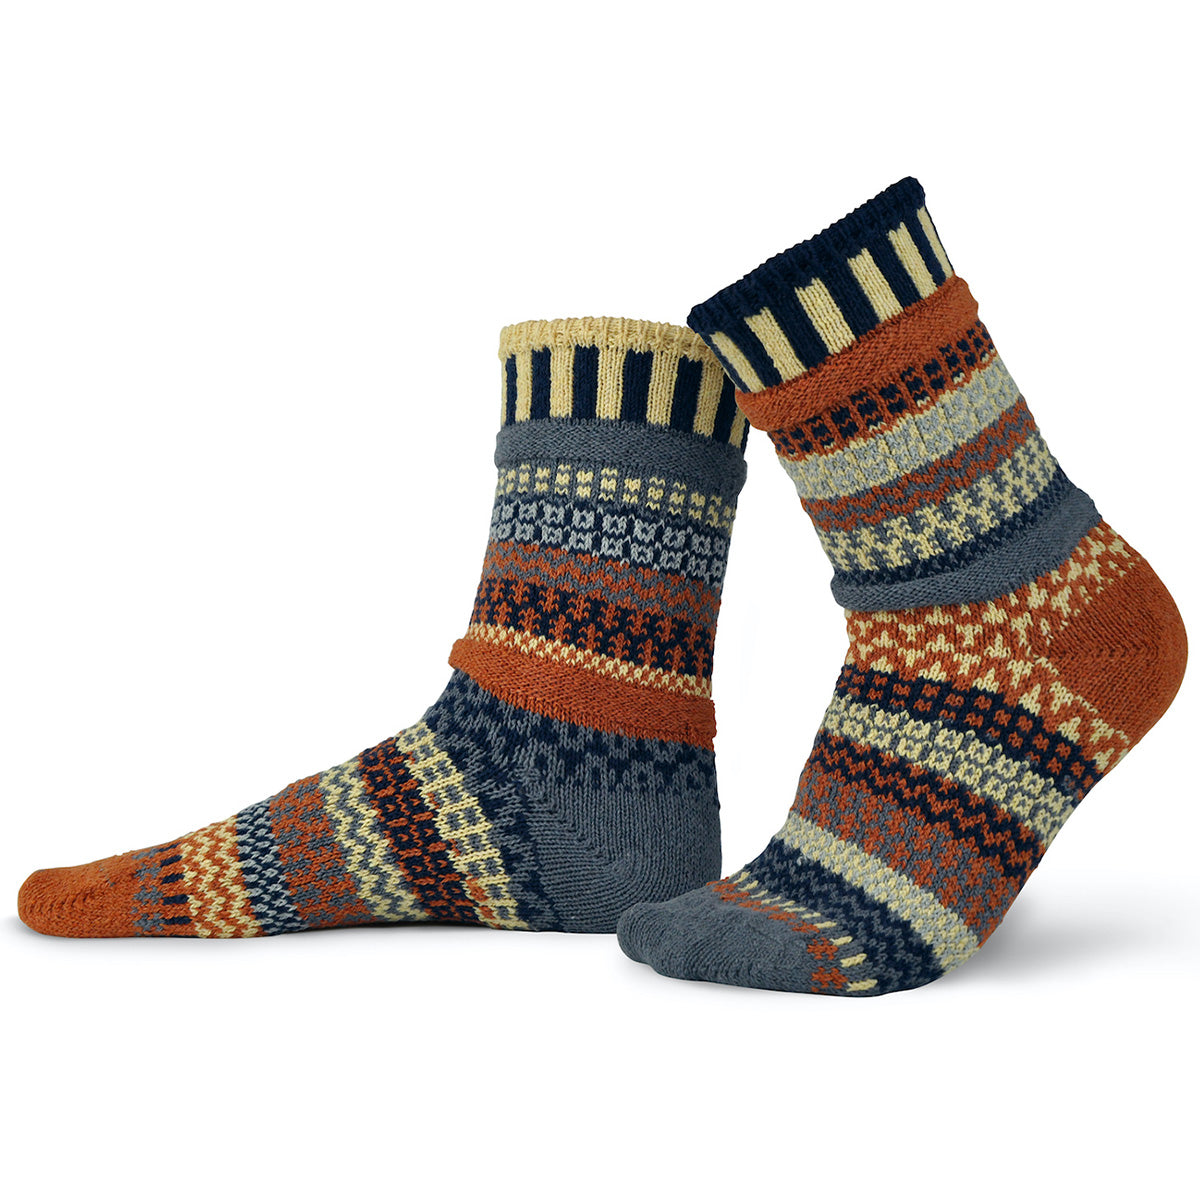 Nutmeg mismatched socks from Solmates feature patterned stripes in tones of gray, brown, light yellow, and black!